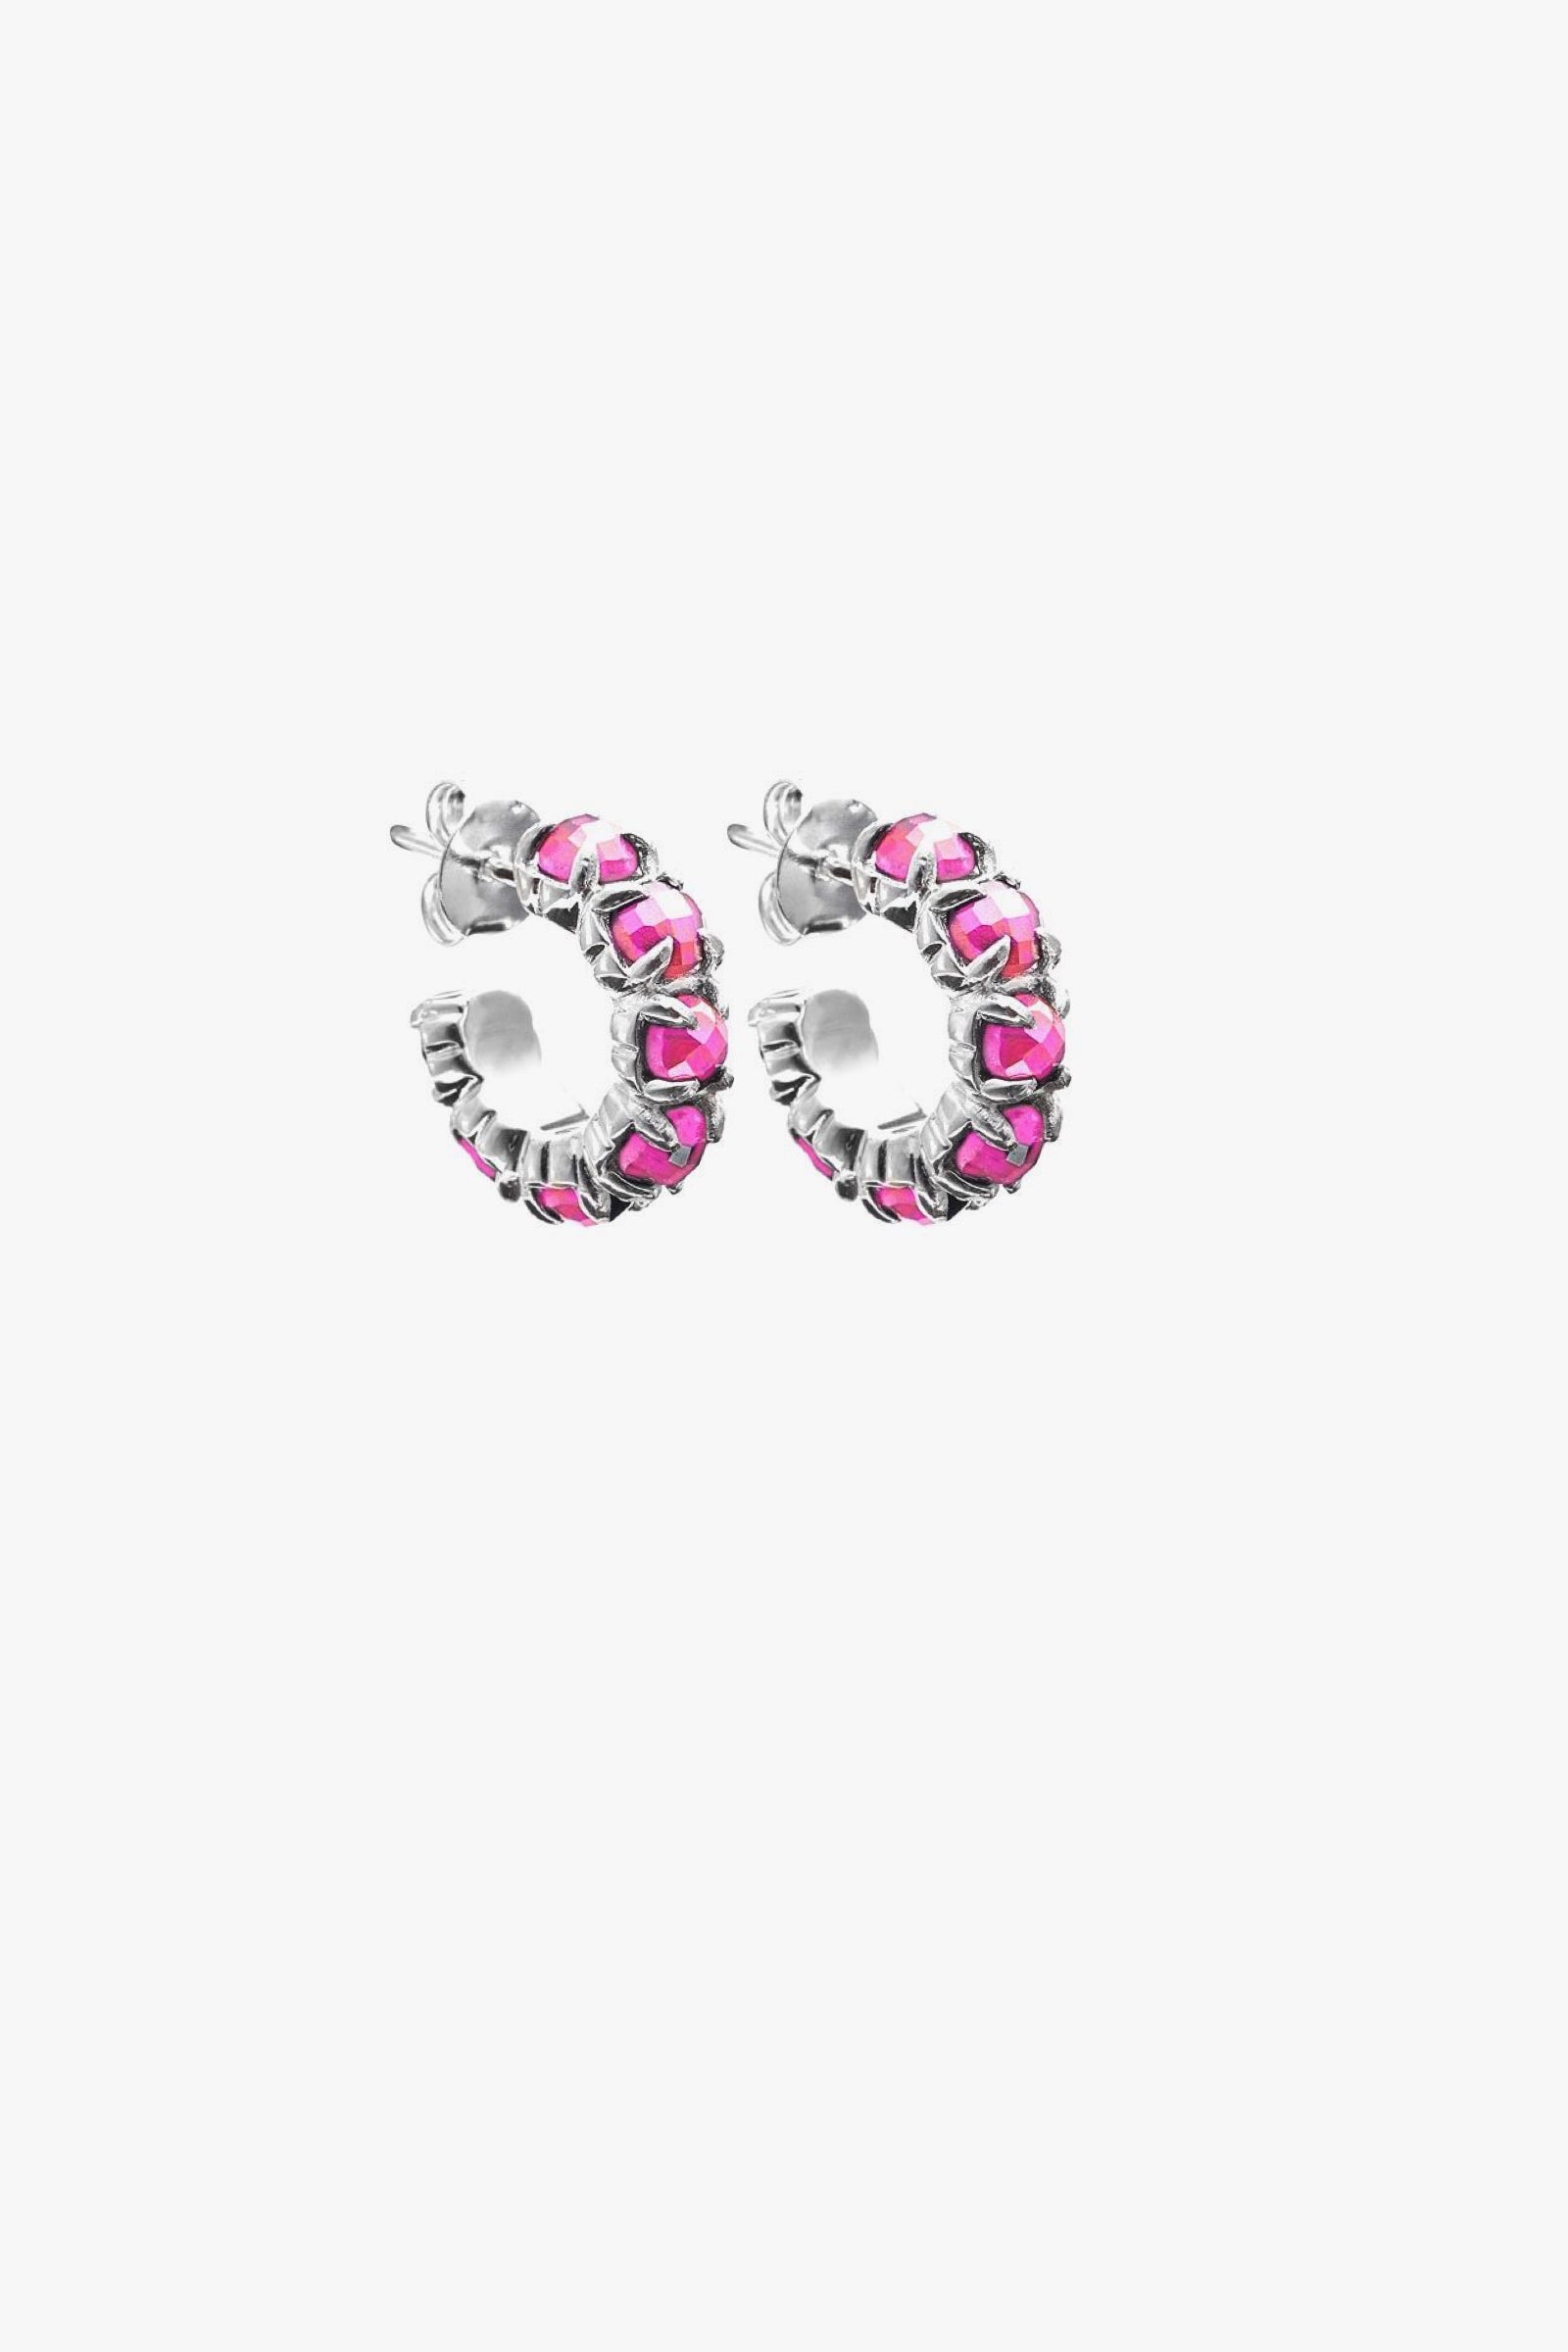 HALO CLUSTER EARRING - PINK TOPAZ